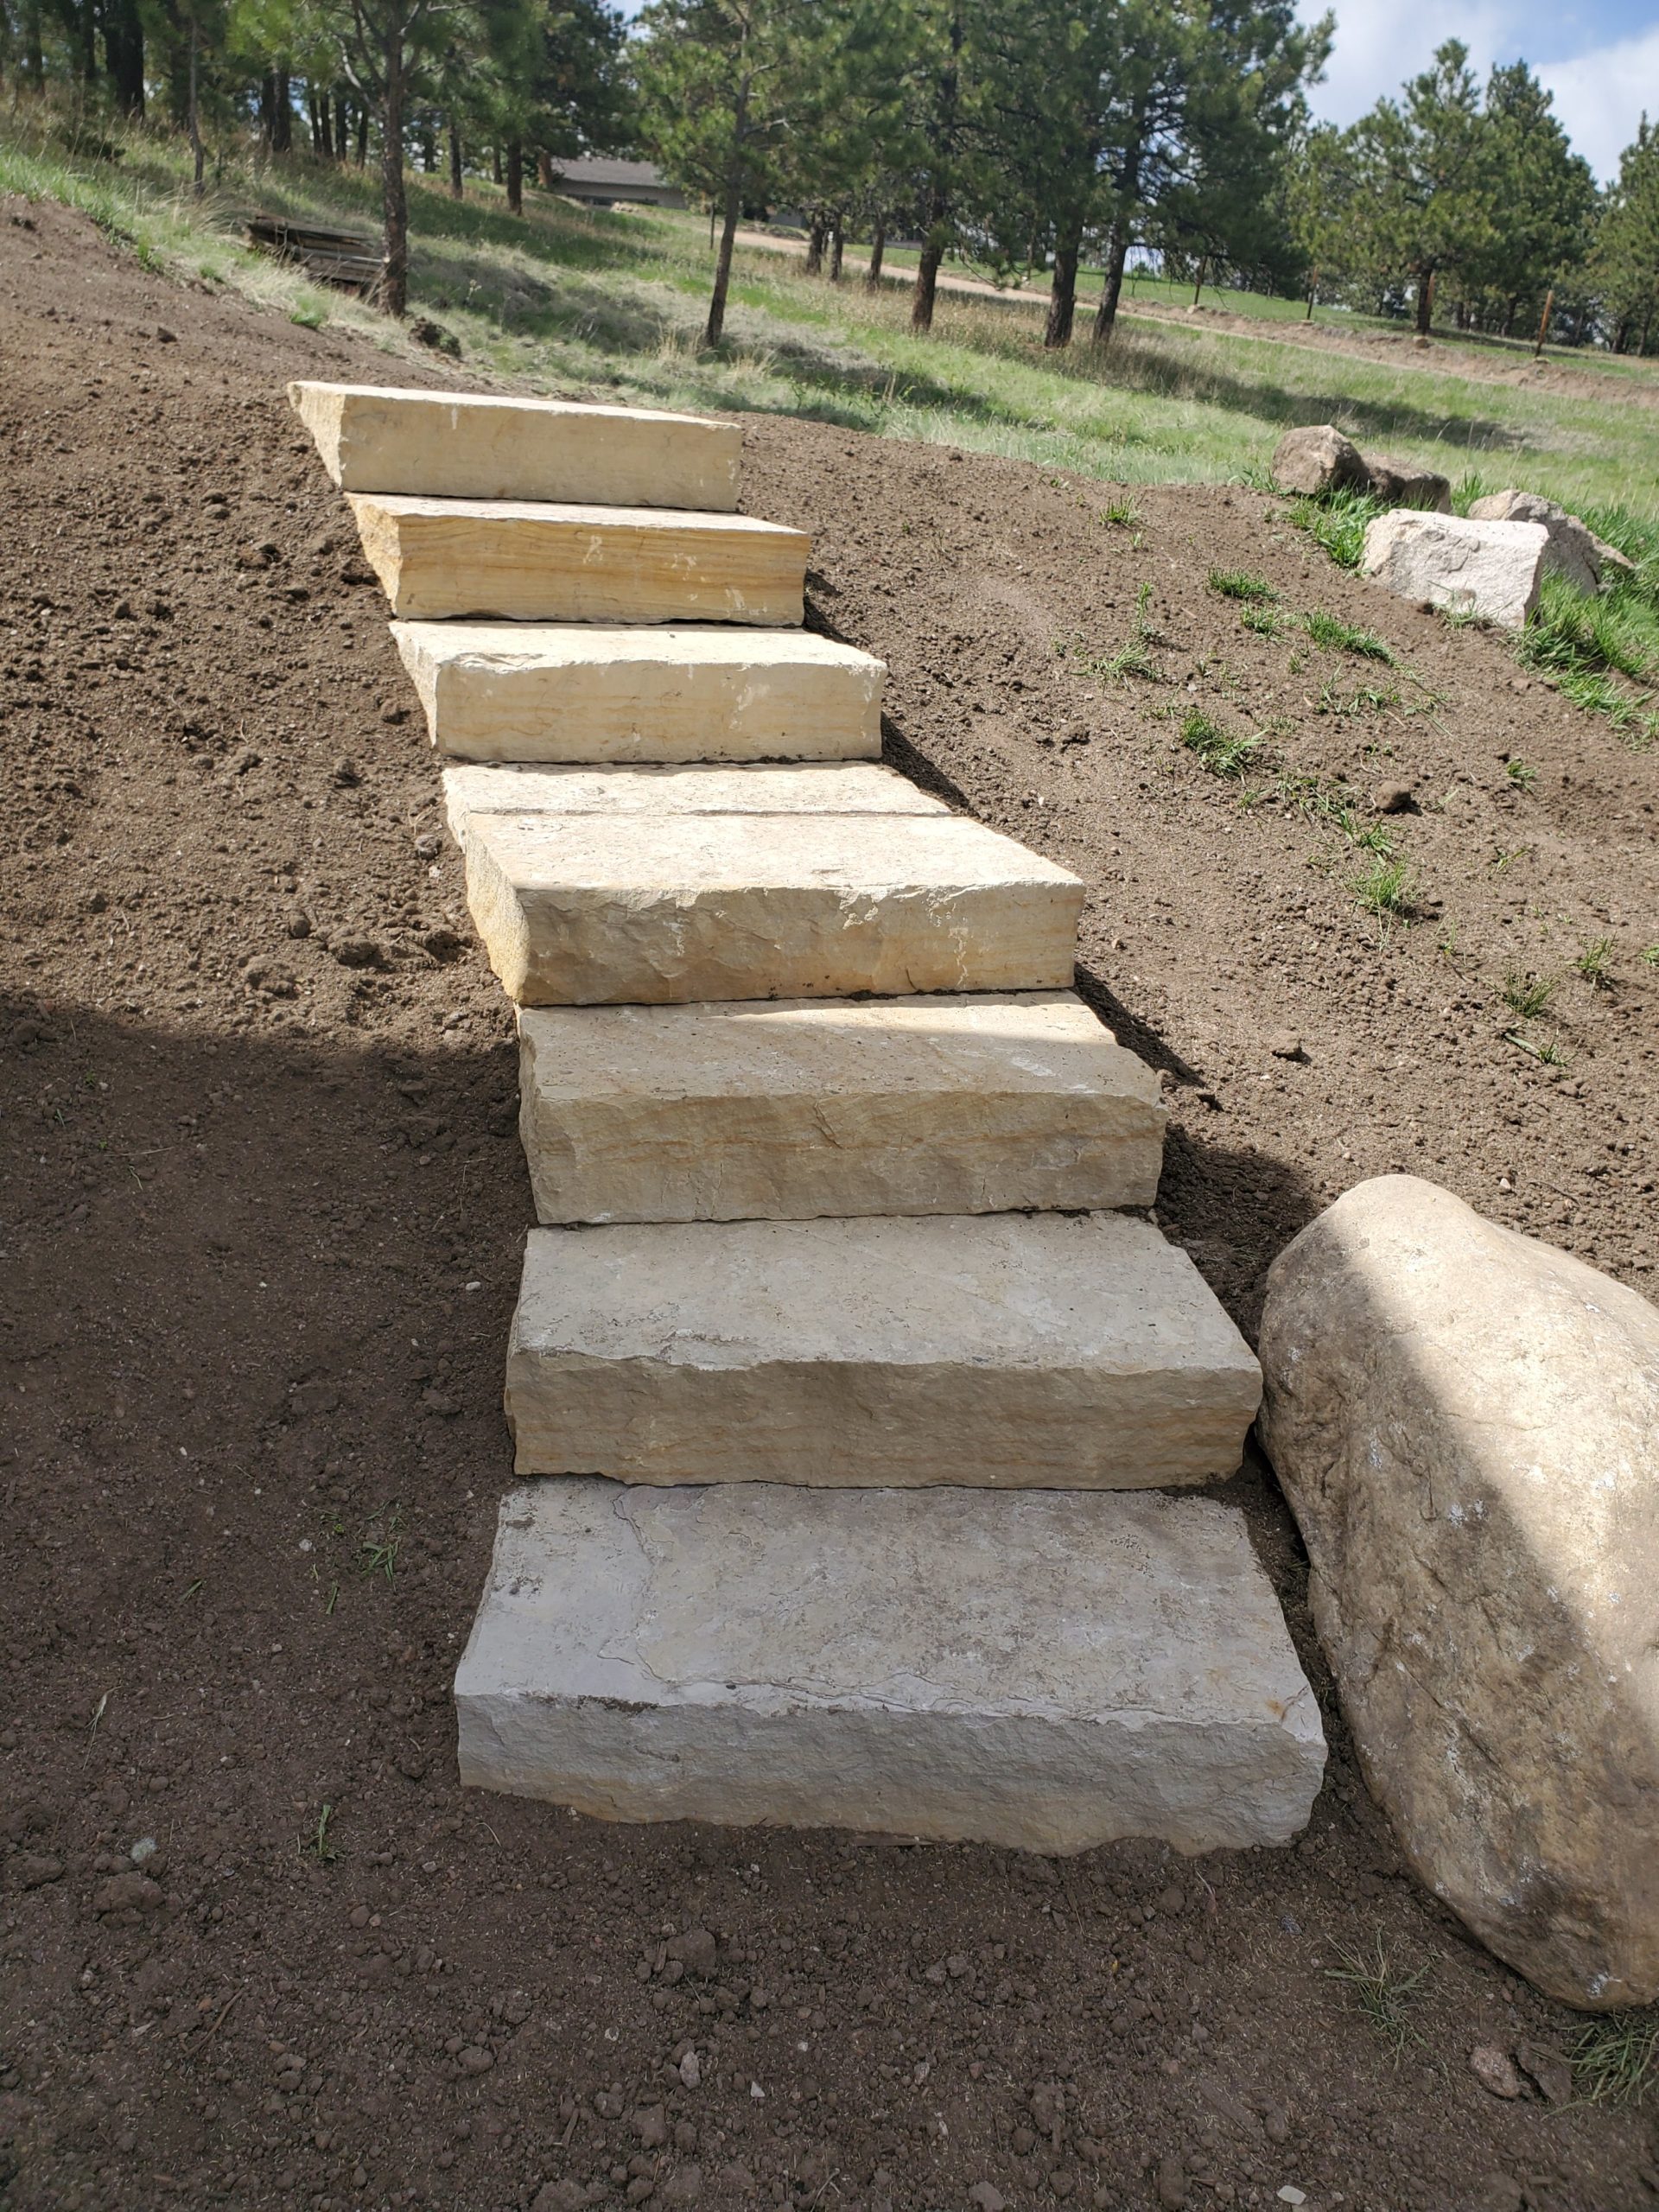 In-progress short staircase made of light-colored stone